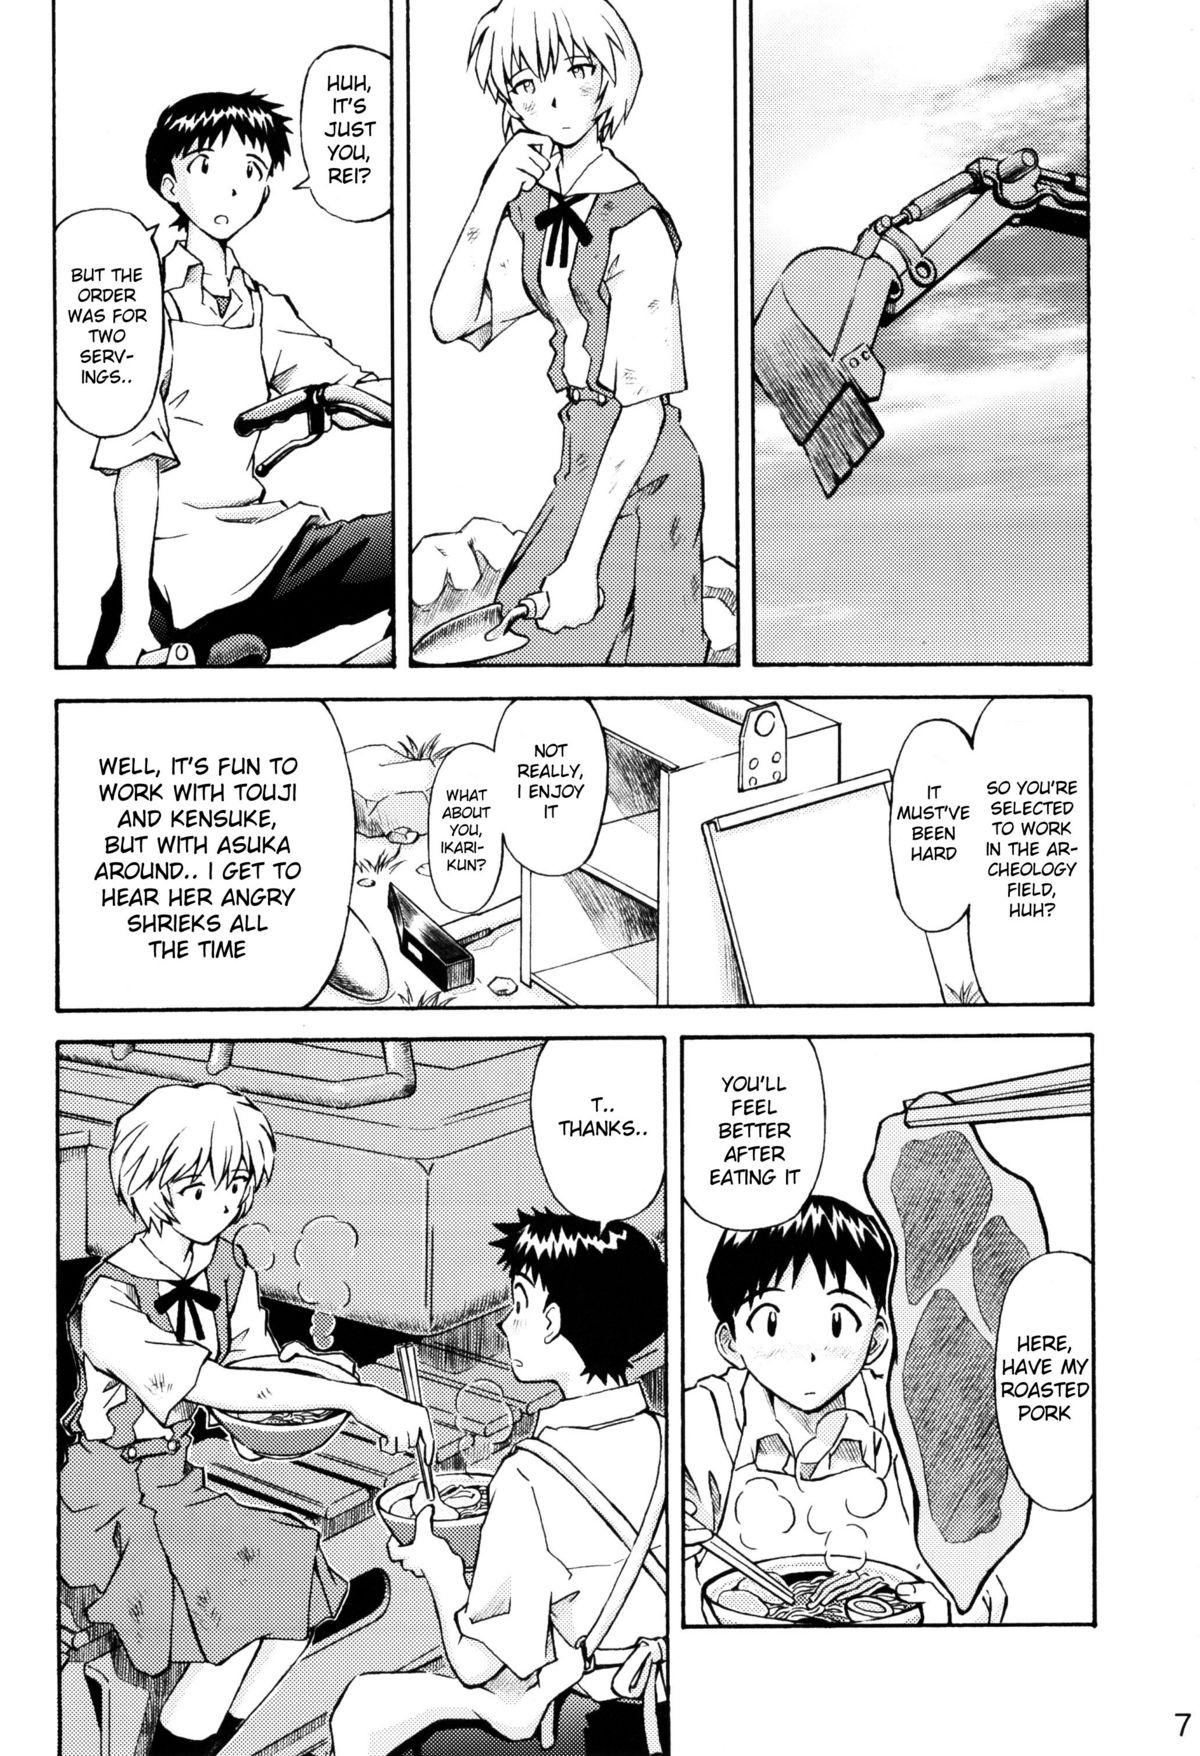 Body Massage Asuka Trial 2 - Neon genesis evangelion Soapy - Page 6